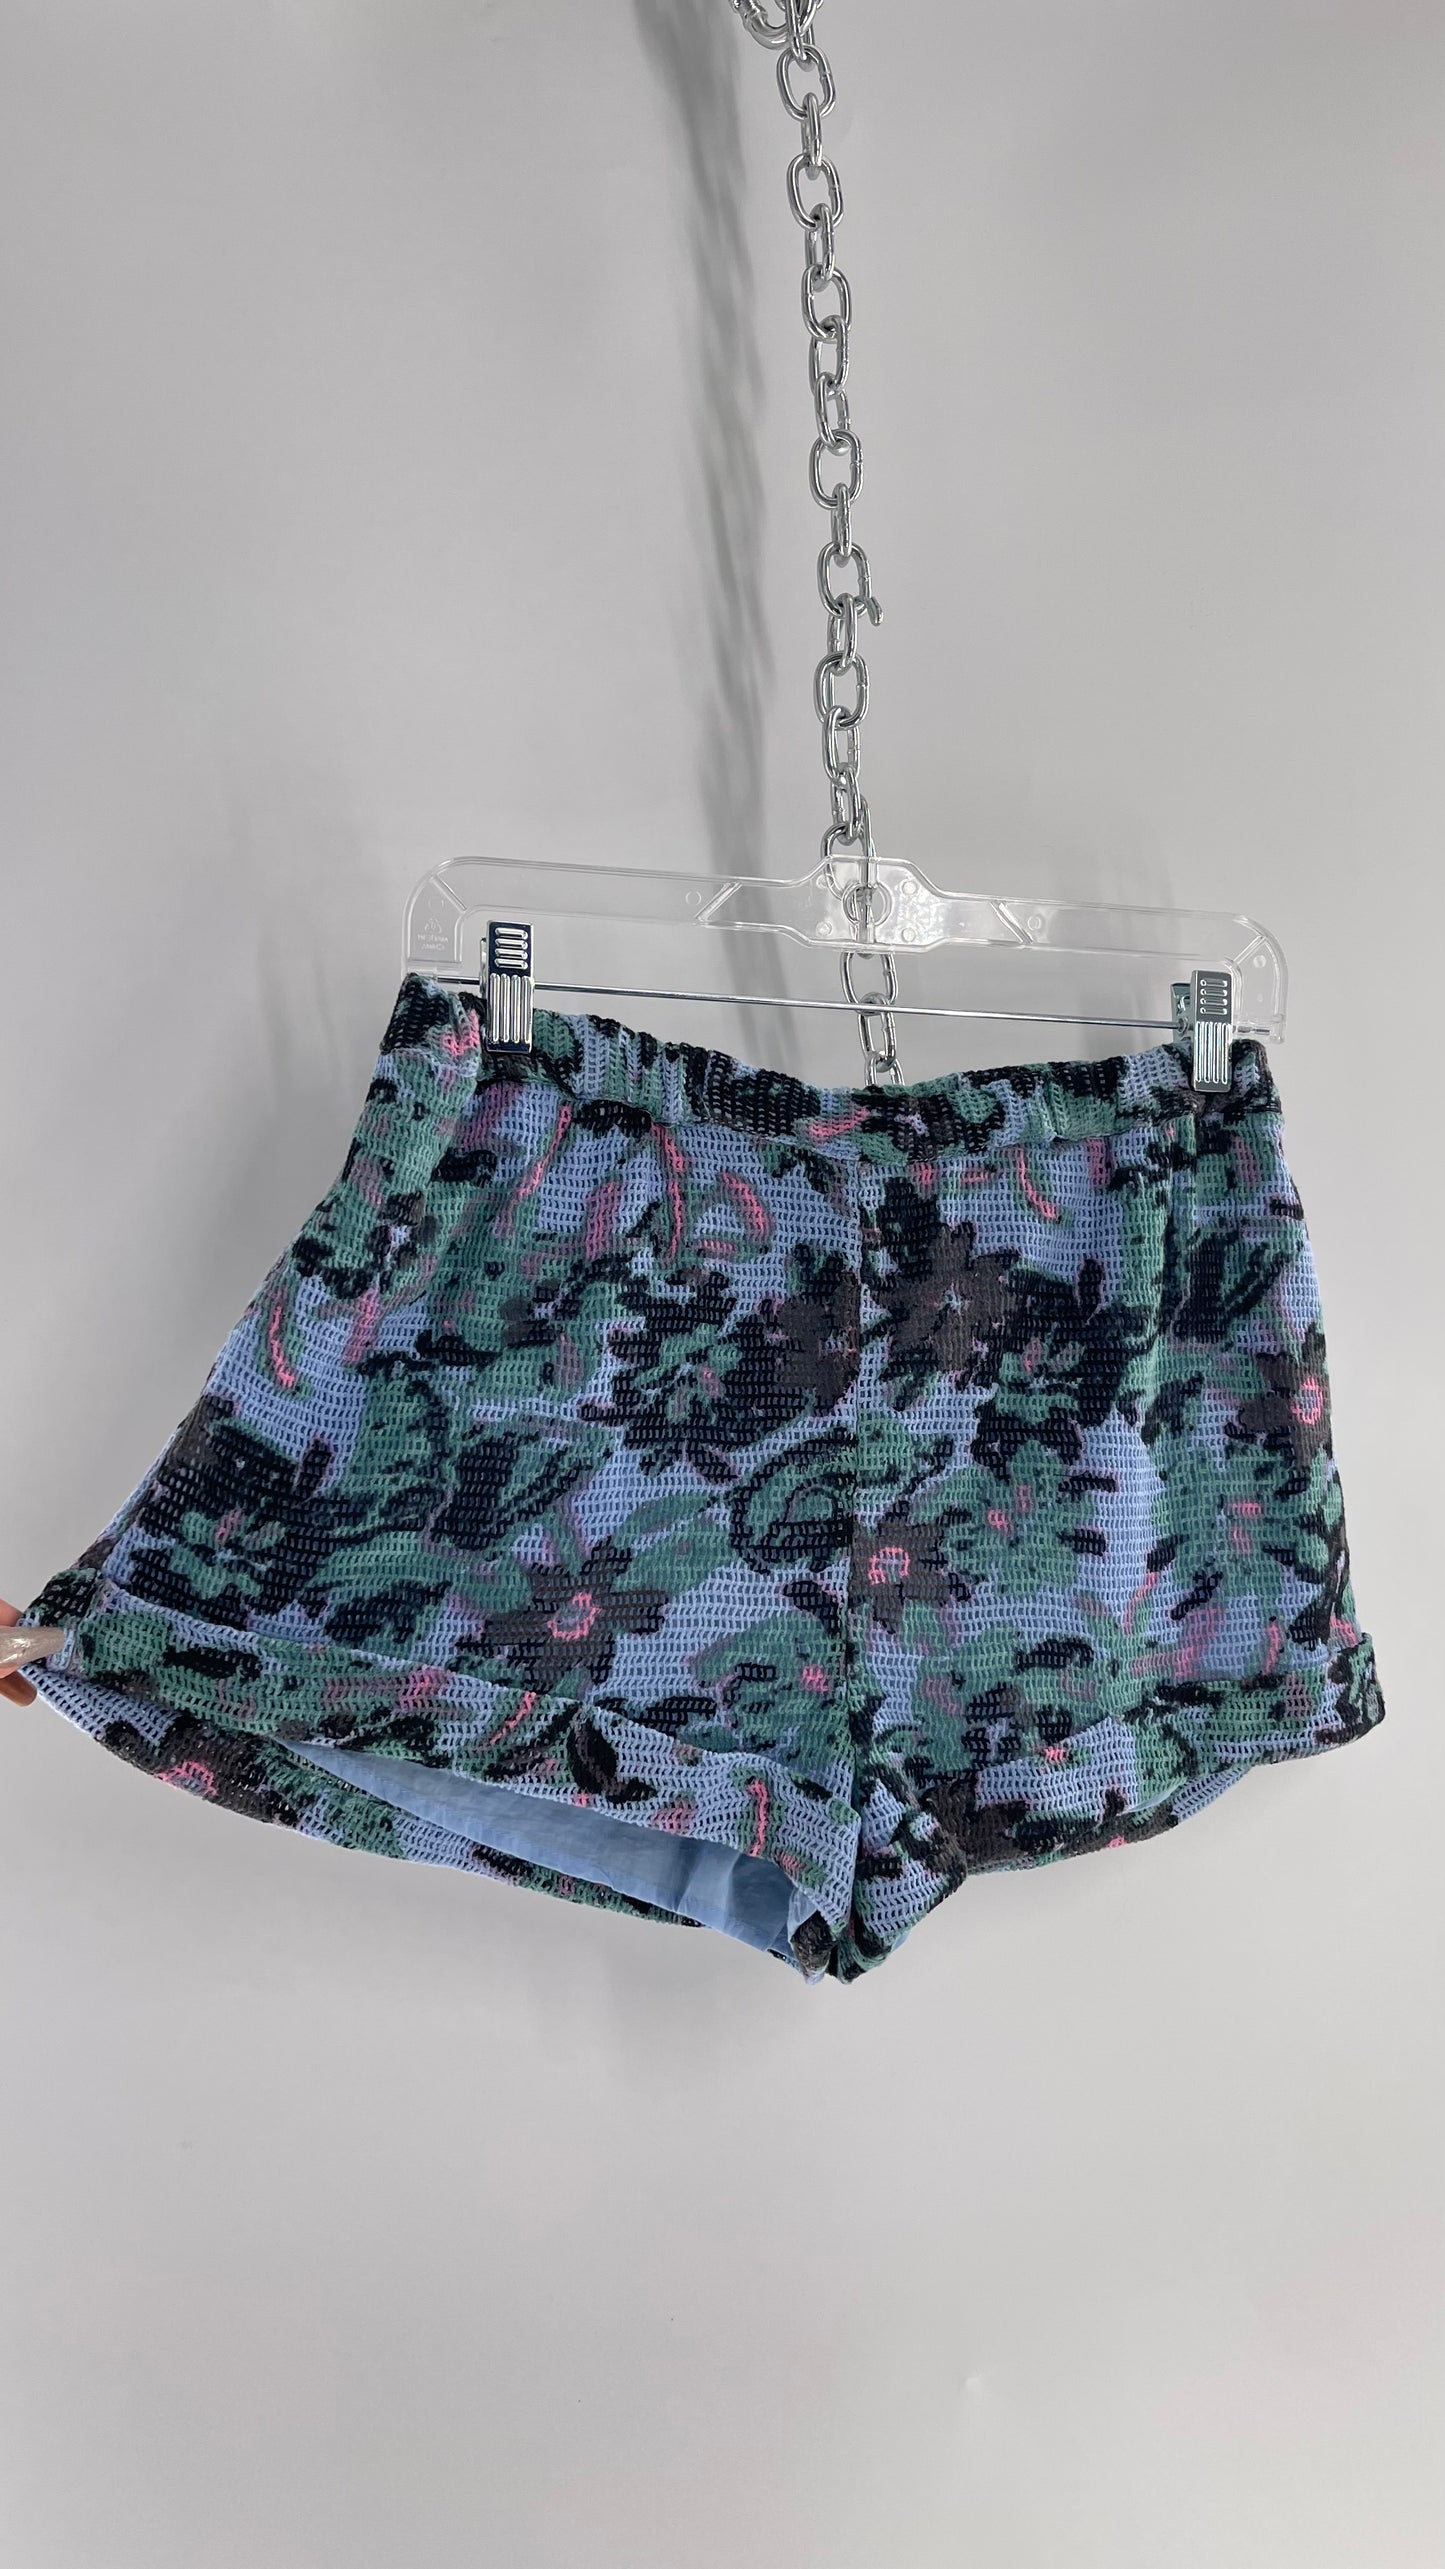 Urban Outfitters Out from Under Powder Blue and Green Floral Mesh/Gauze Shorts (Small)